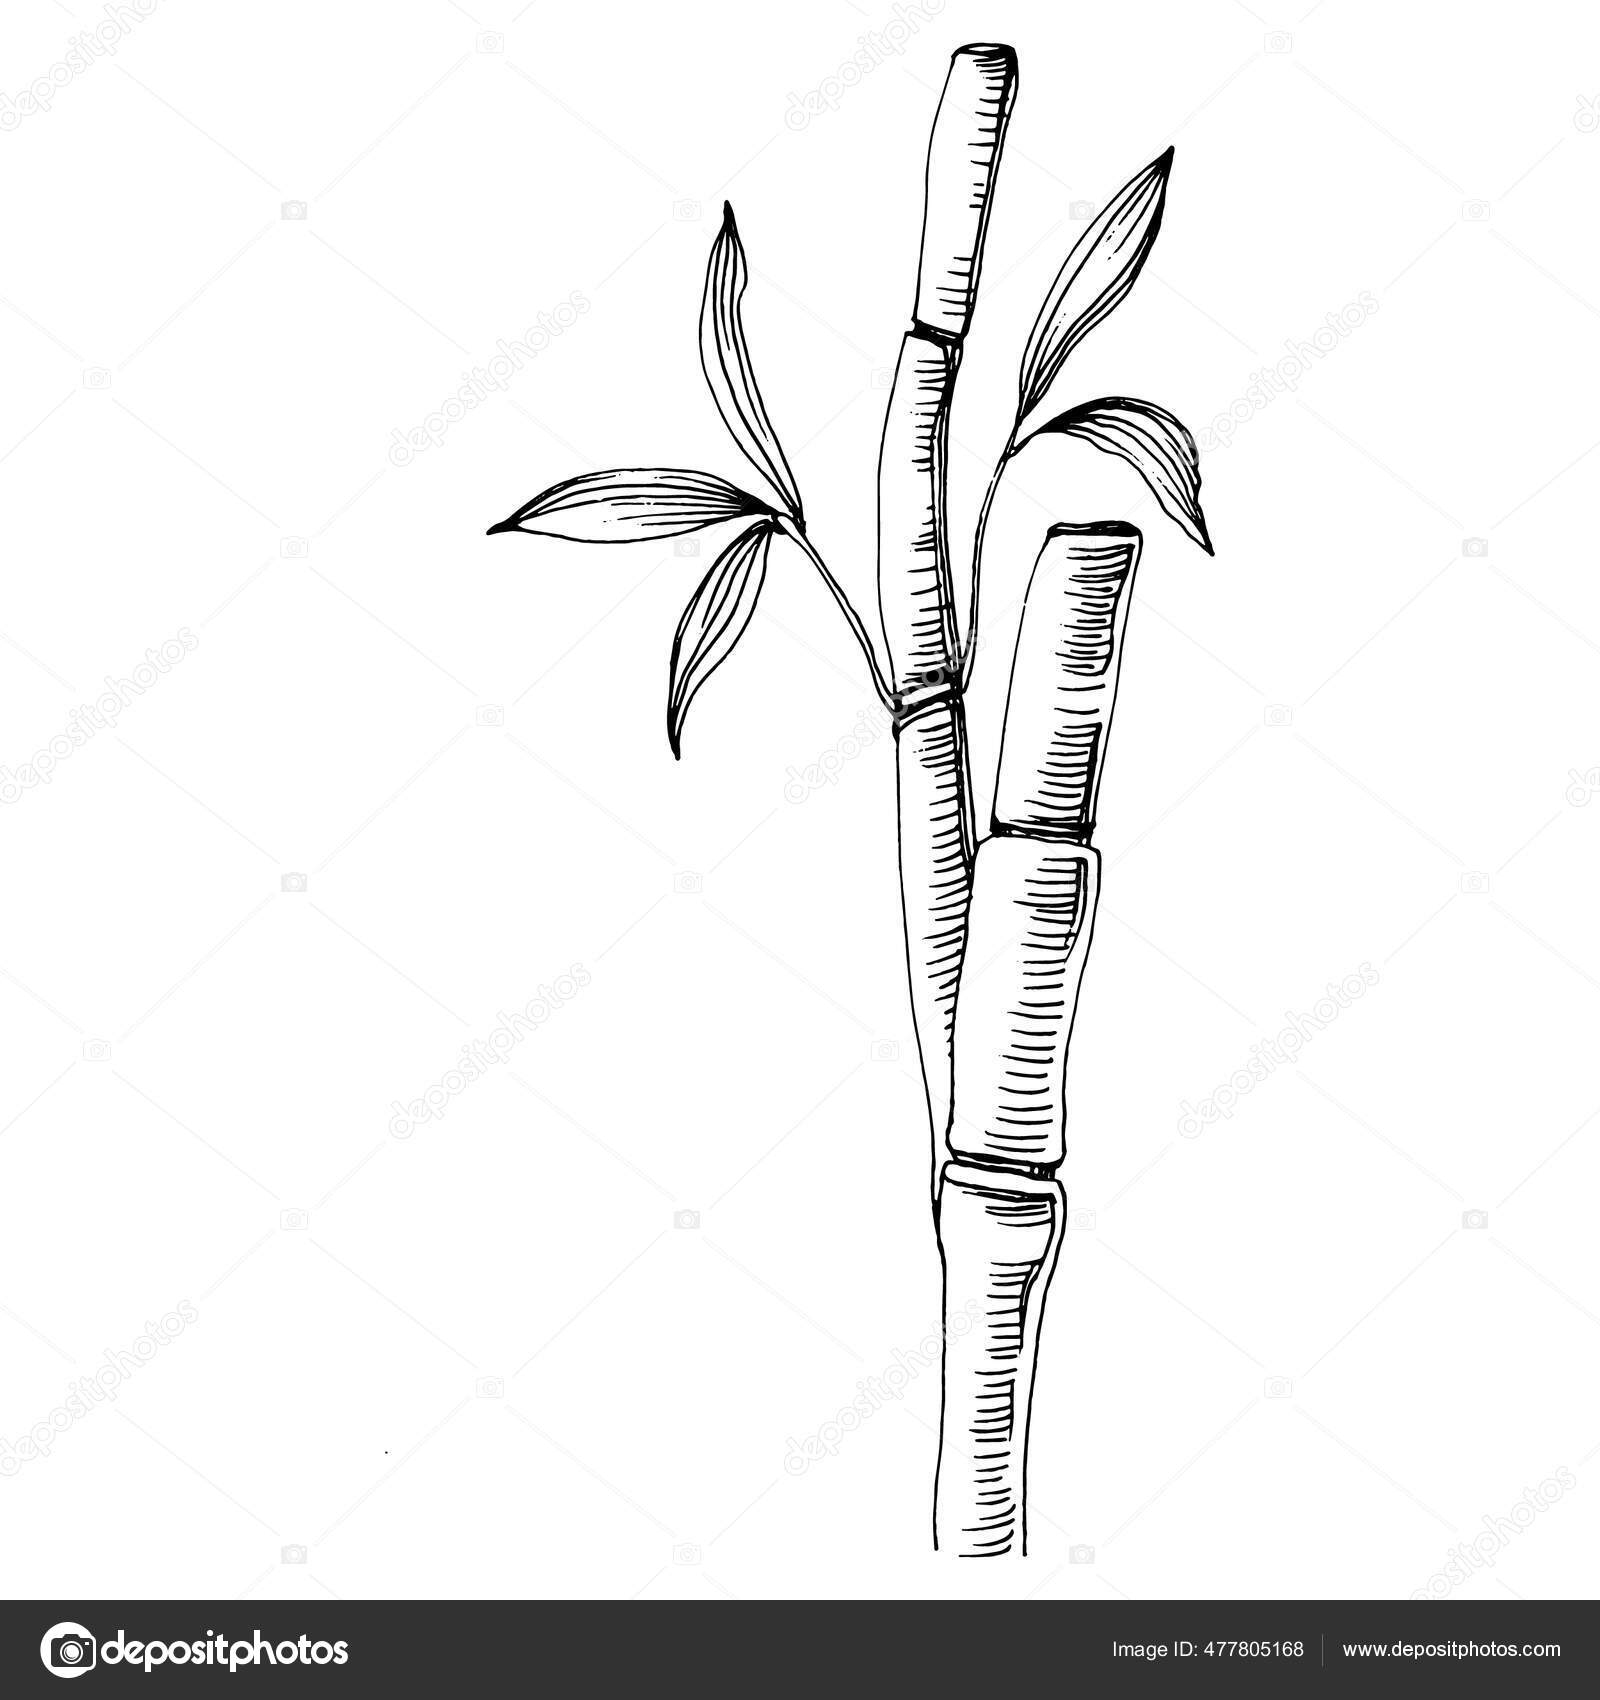 Root of Sugarcane Vector IconLine Vector Icon Isolated on White Background  Root of Sugarcane  Stock Vector  Illustration of nature agriculture  165478292